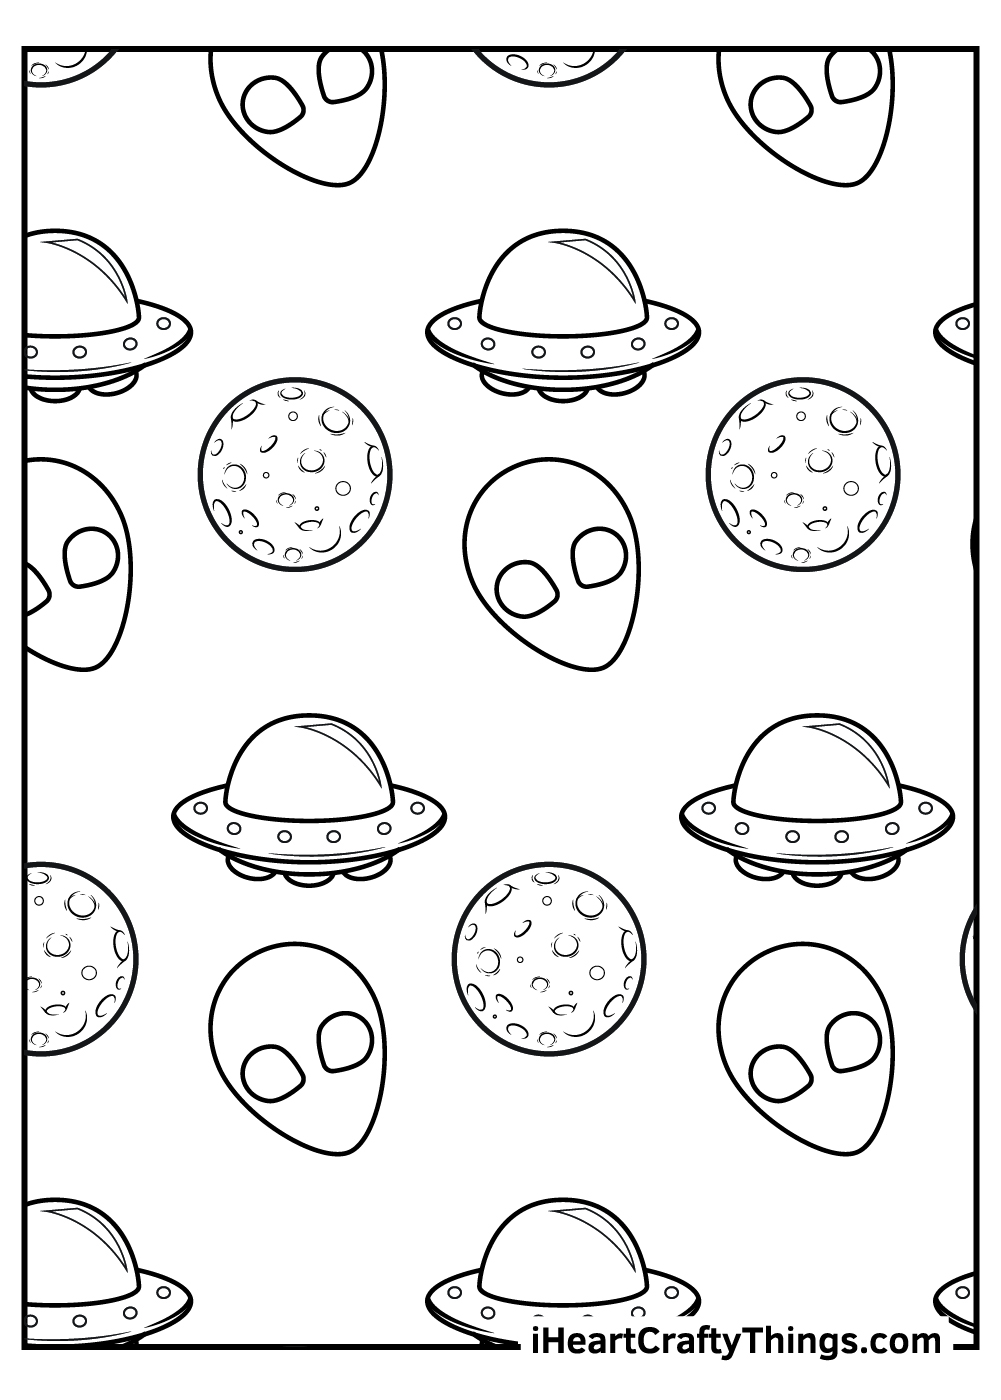 Alien Coloring Pages Updated 2021